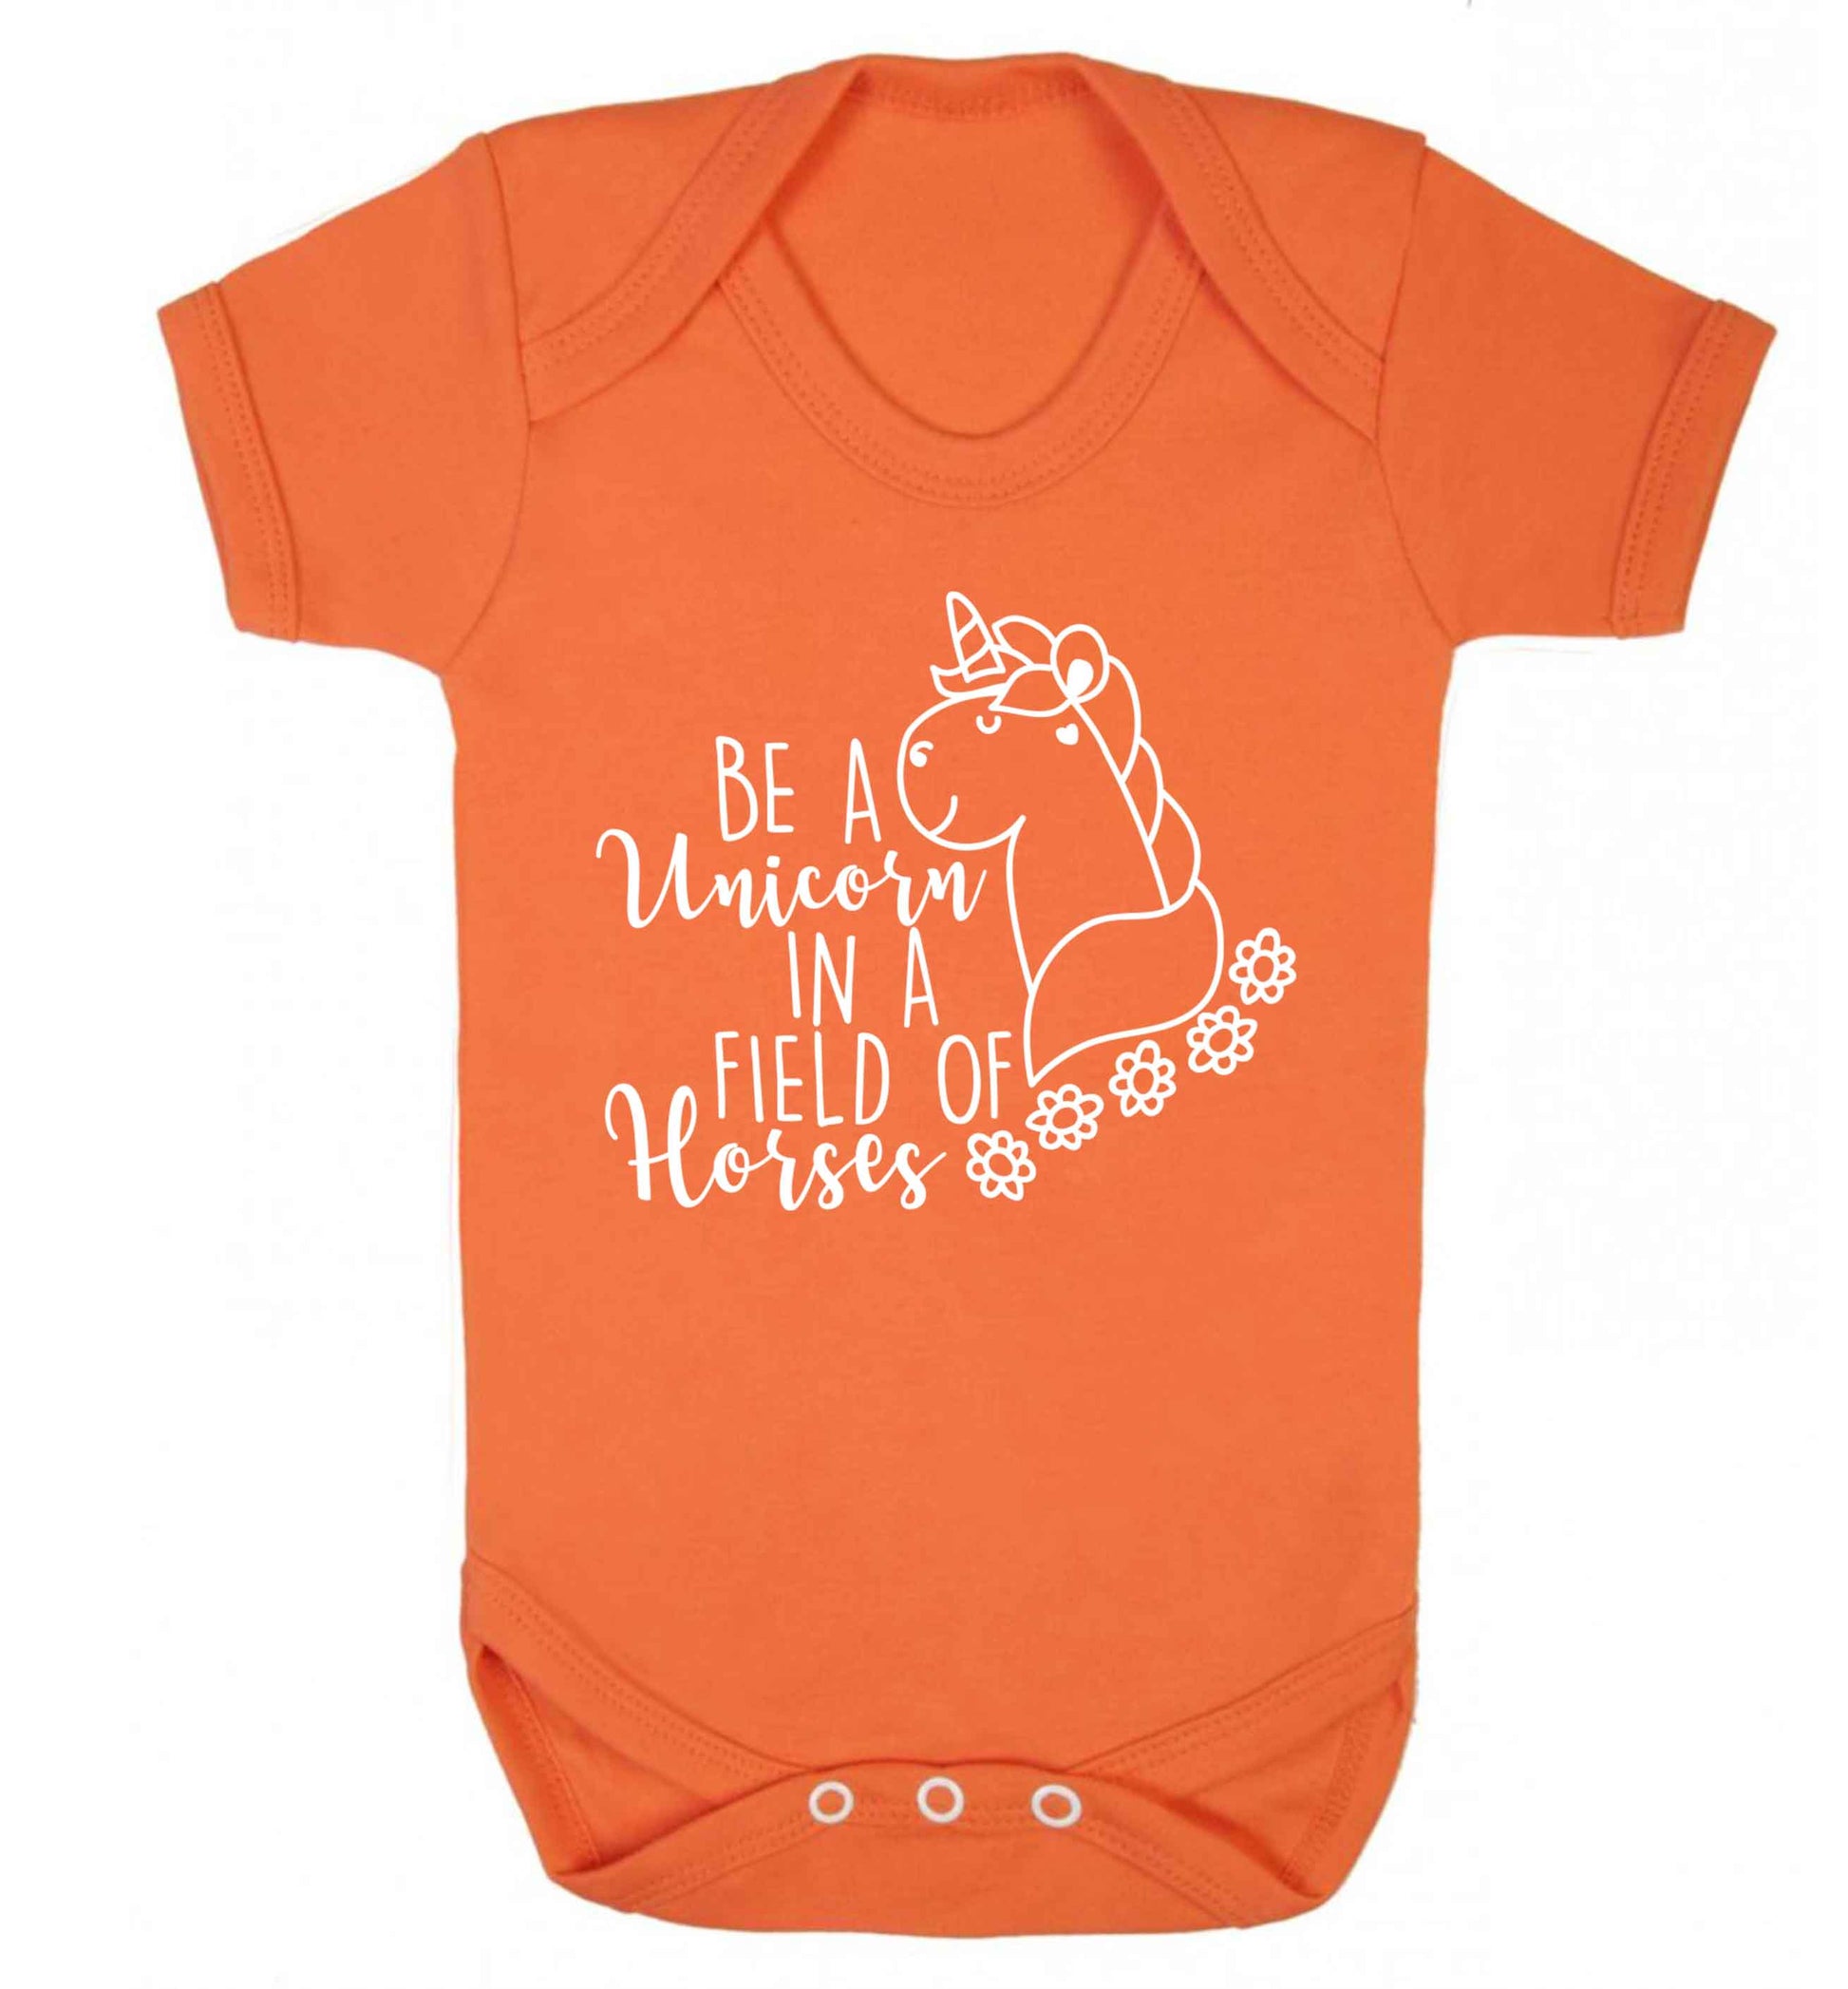 Be a unicorn in a field of horses Baby Vest orange 18-24 months